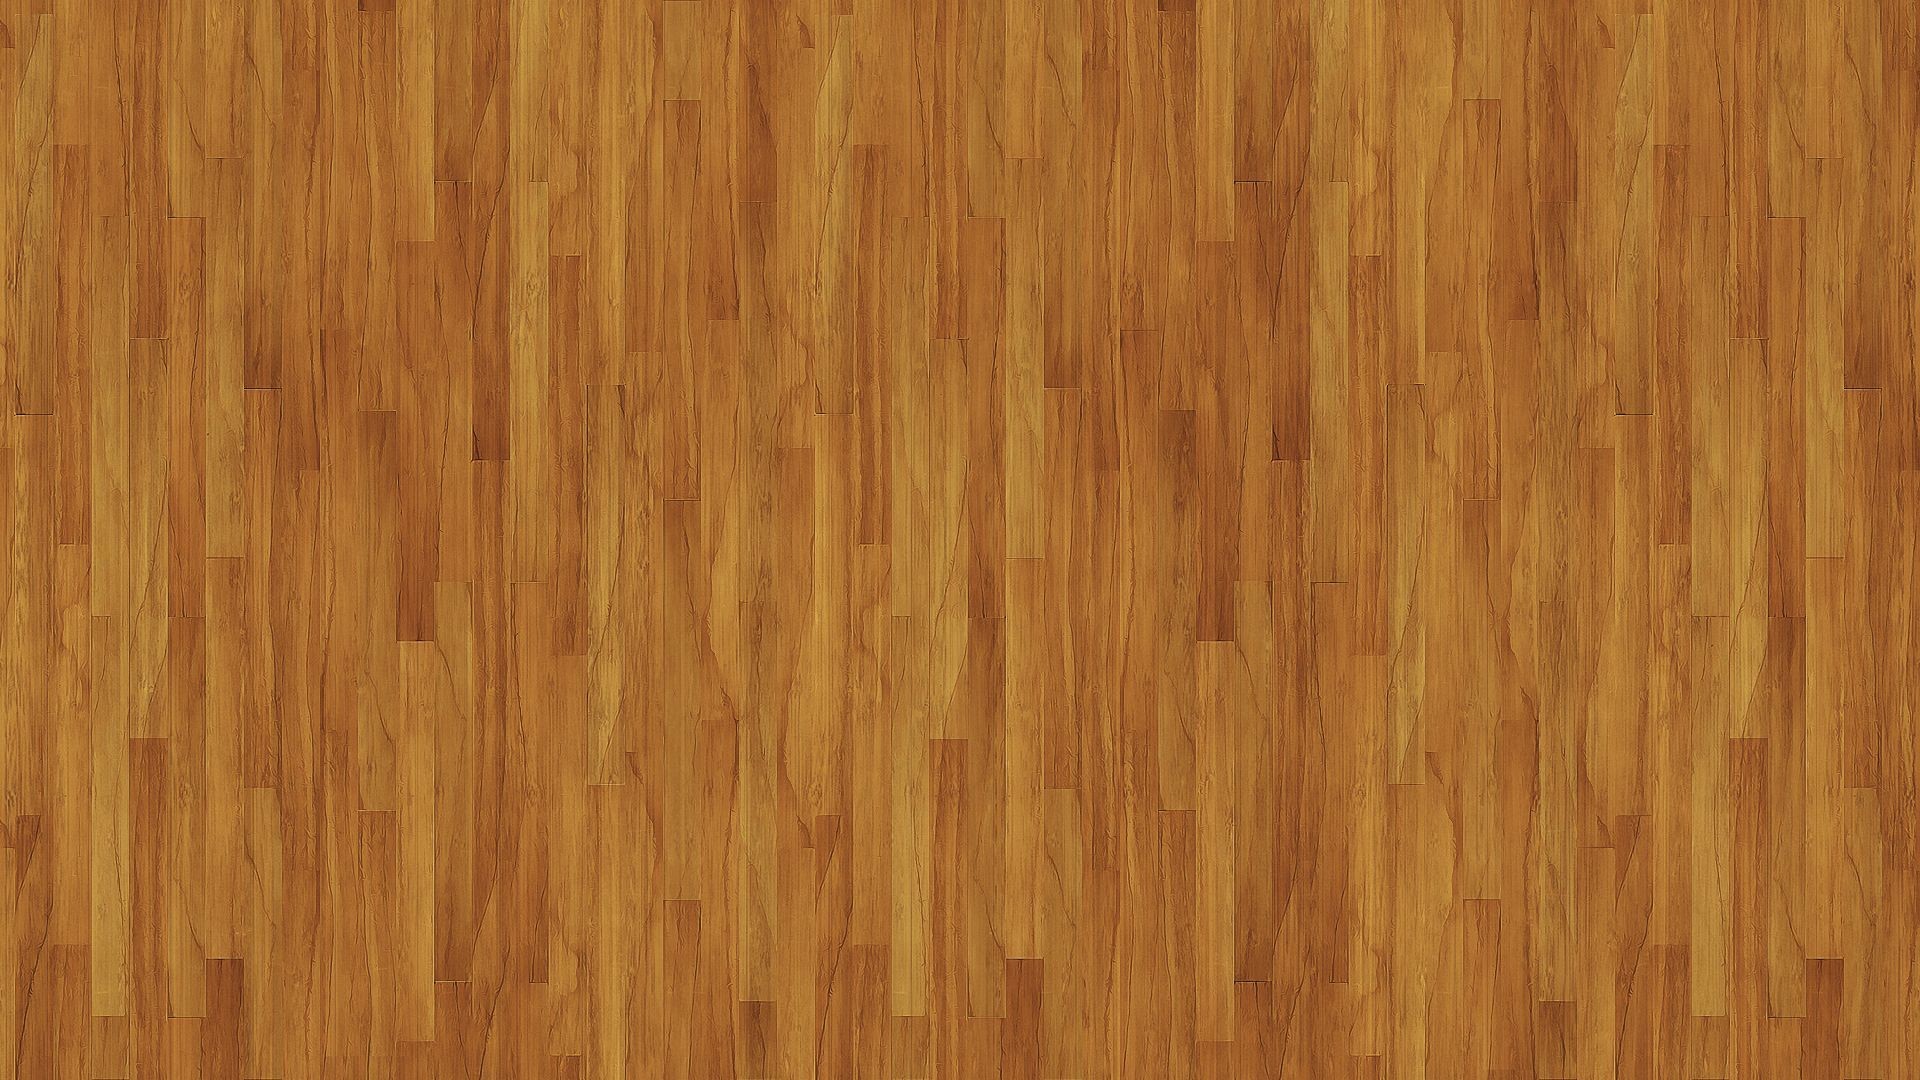 1920x1080 Wood Flooring Background And Wood Floor Wallpaper Best Pictures Wallpaper  Images Home .